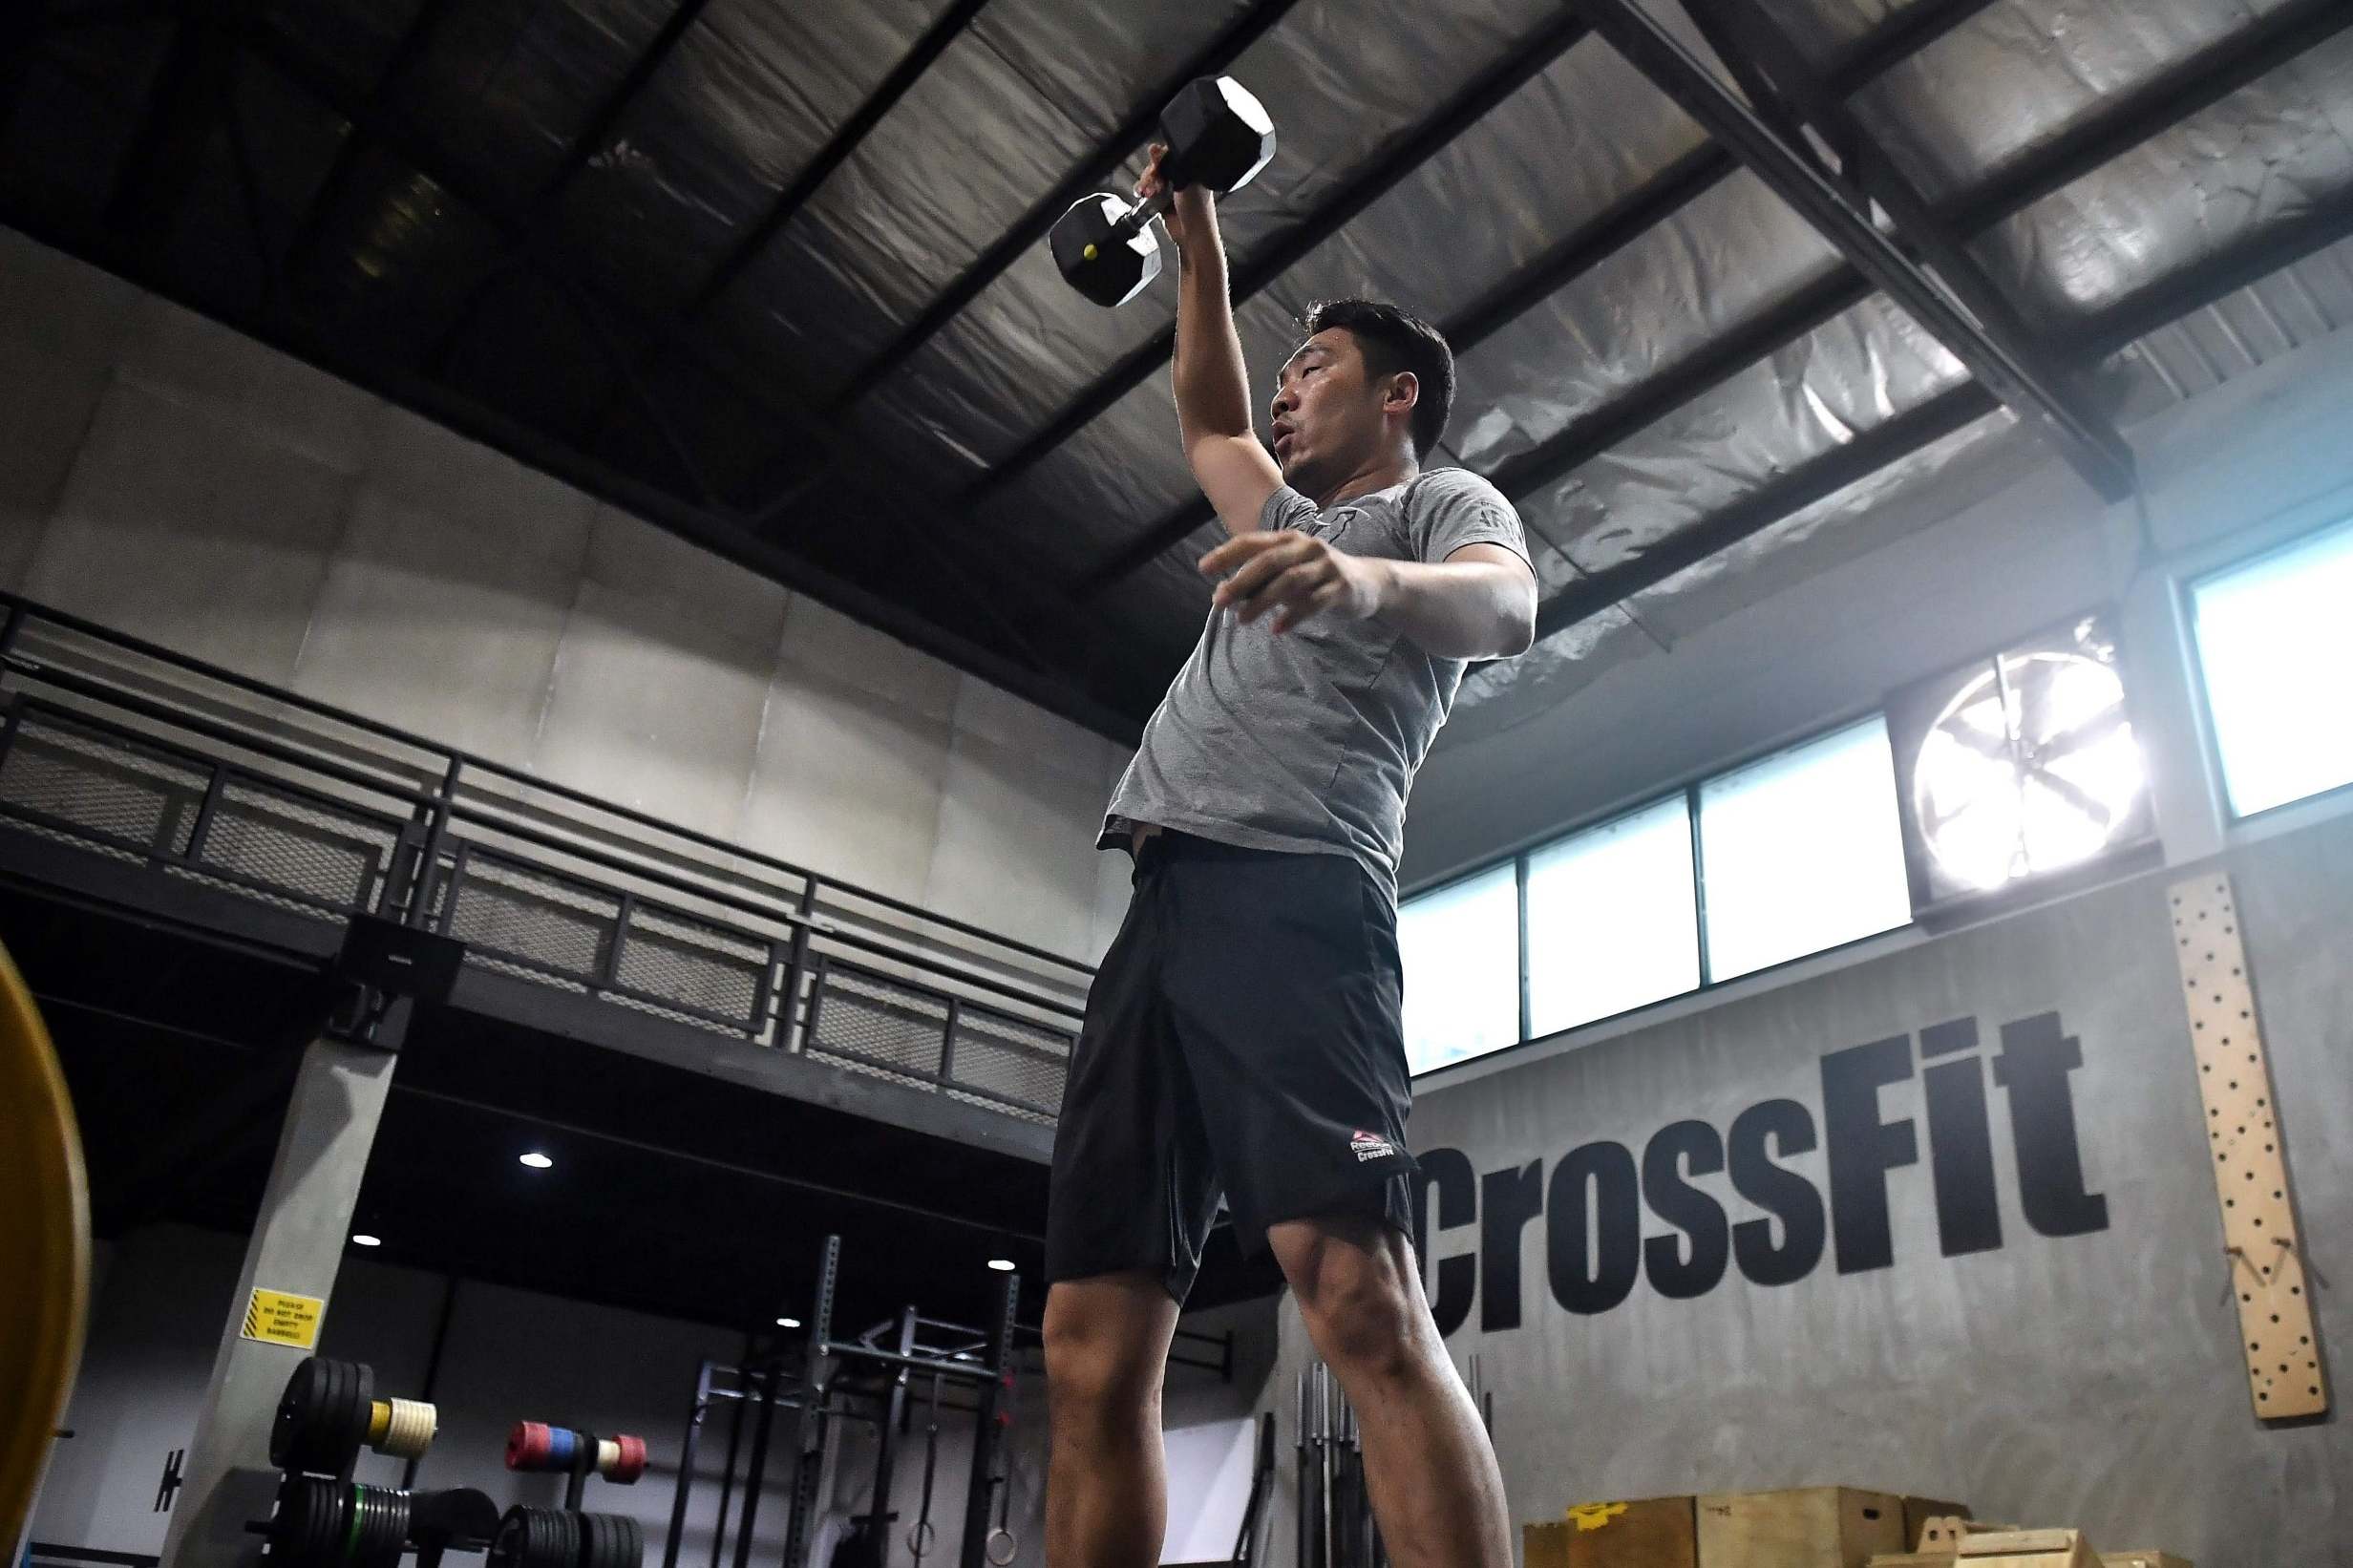 A gym enthusiast exercises while adhering to social distancing guidelines at CrossFit Arena Bangkok